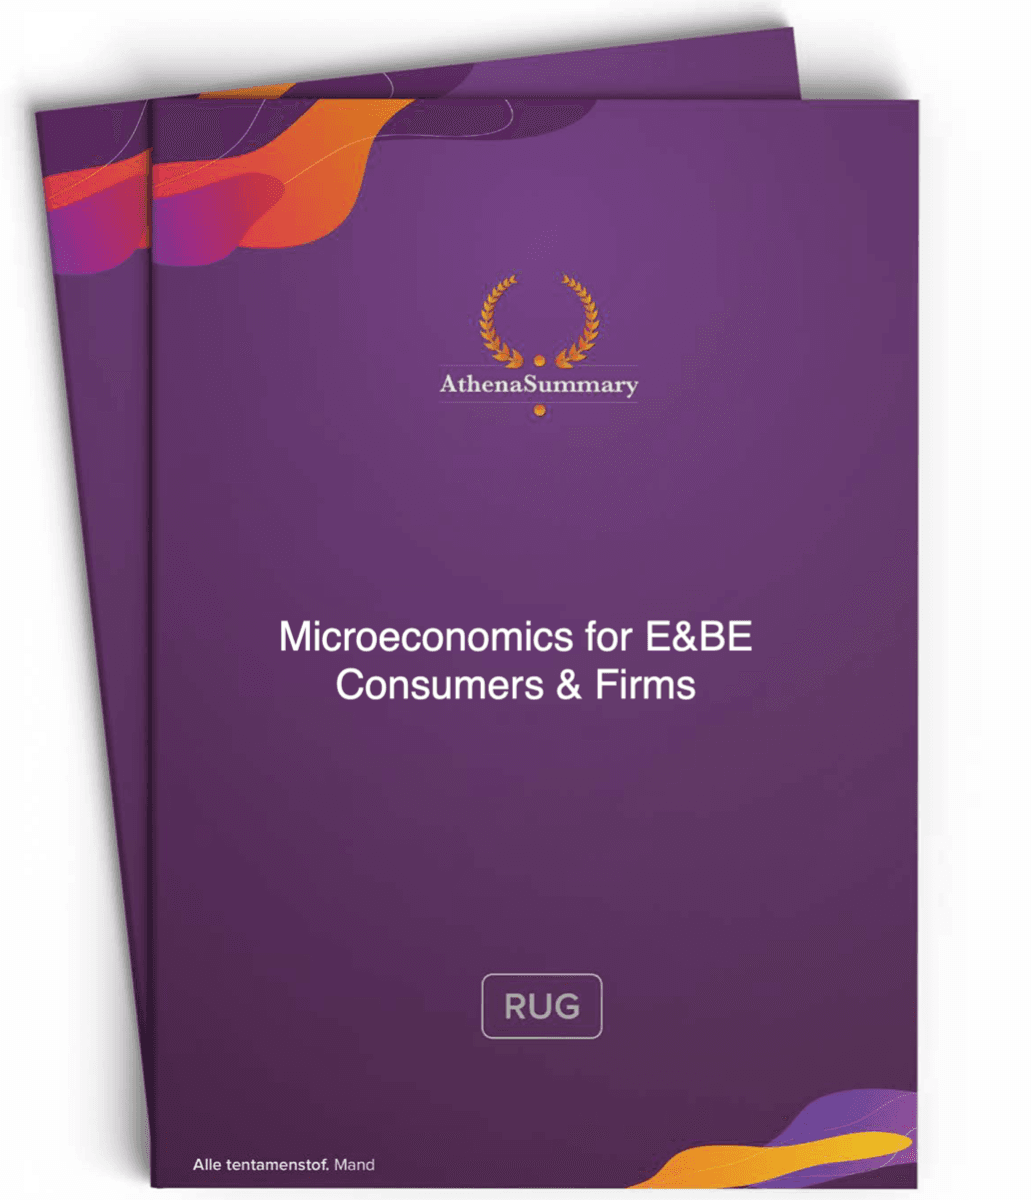 Microeconomics for E&BE: Consumers & Firms